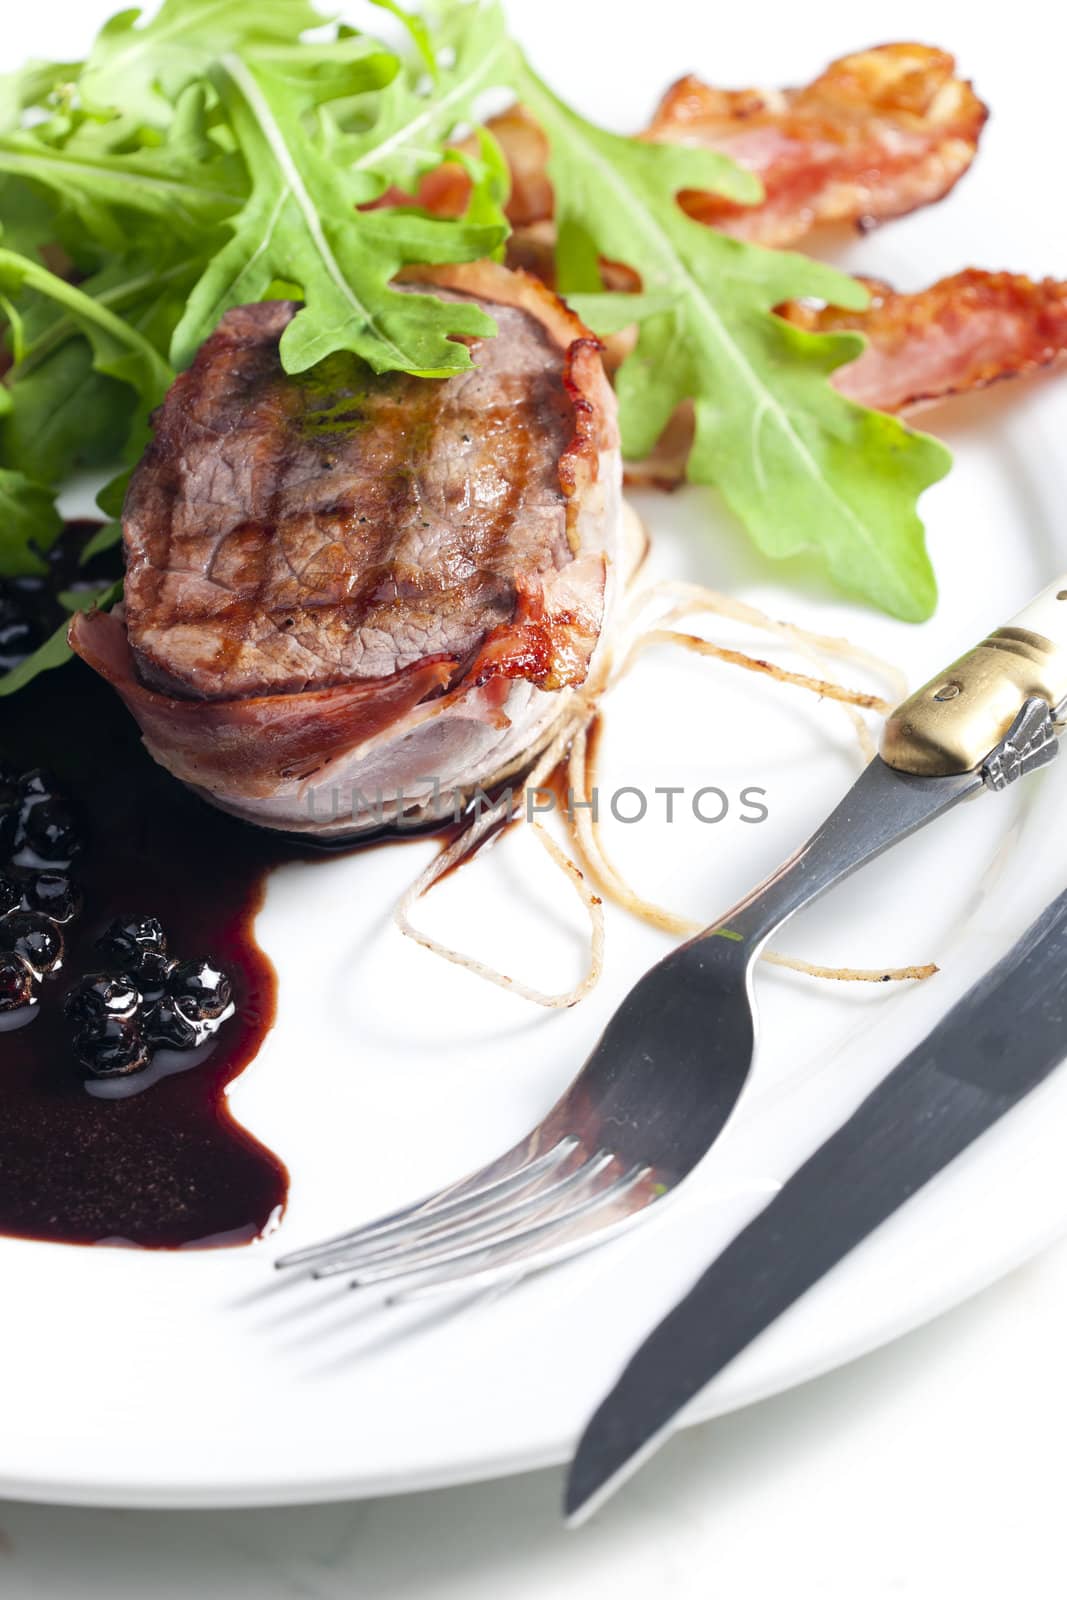 beefsteak grilled in bacon with sauce of juniper and red wine by phbcz